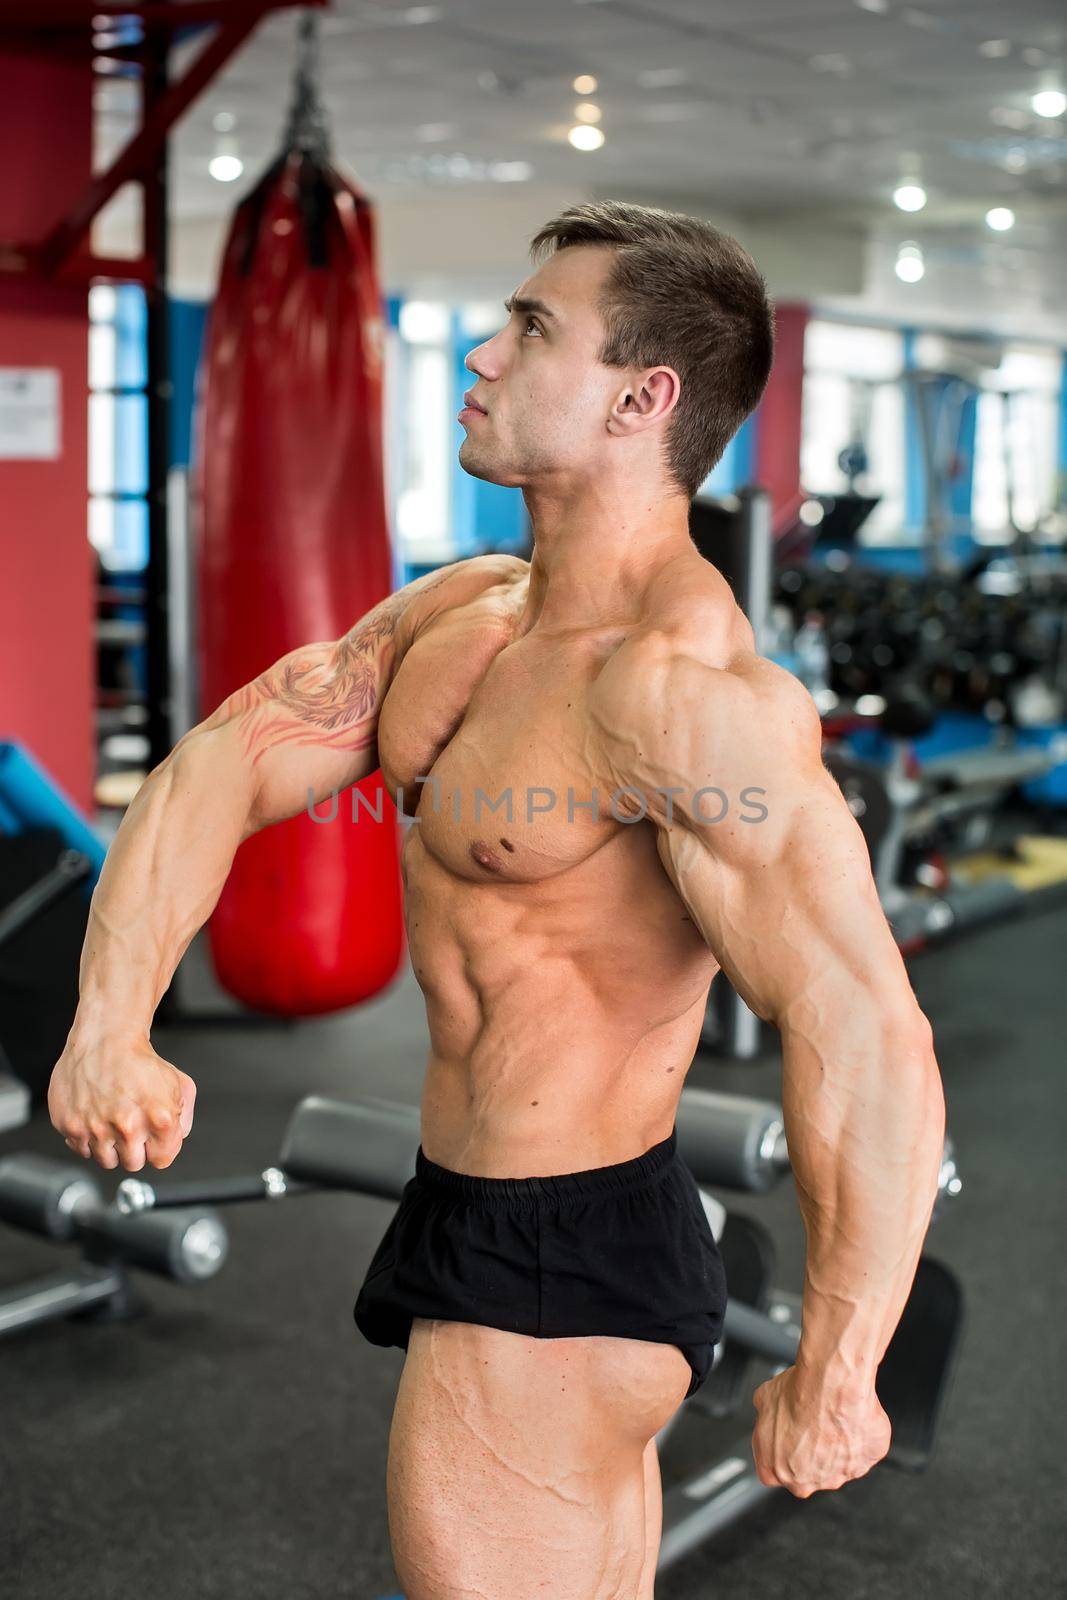 Bodybuilder posing for the camera in the gym